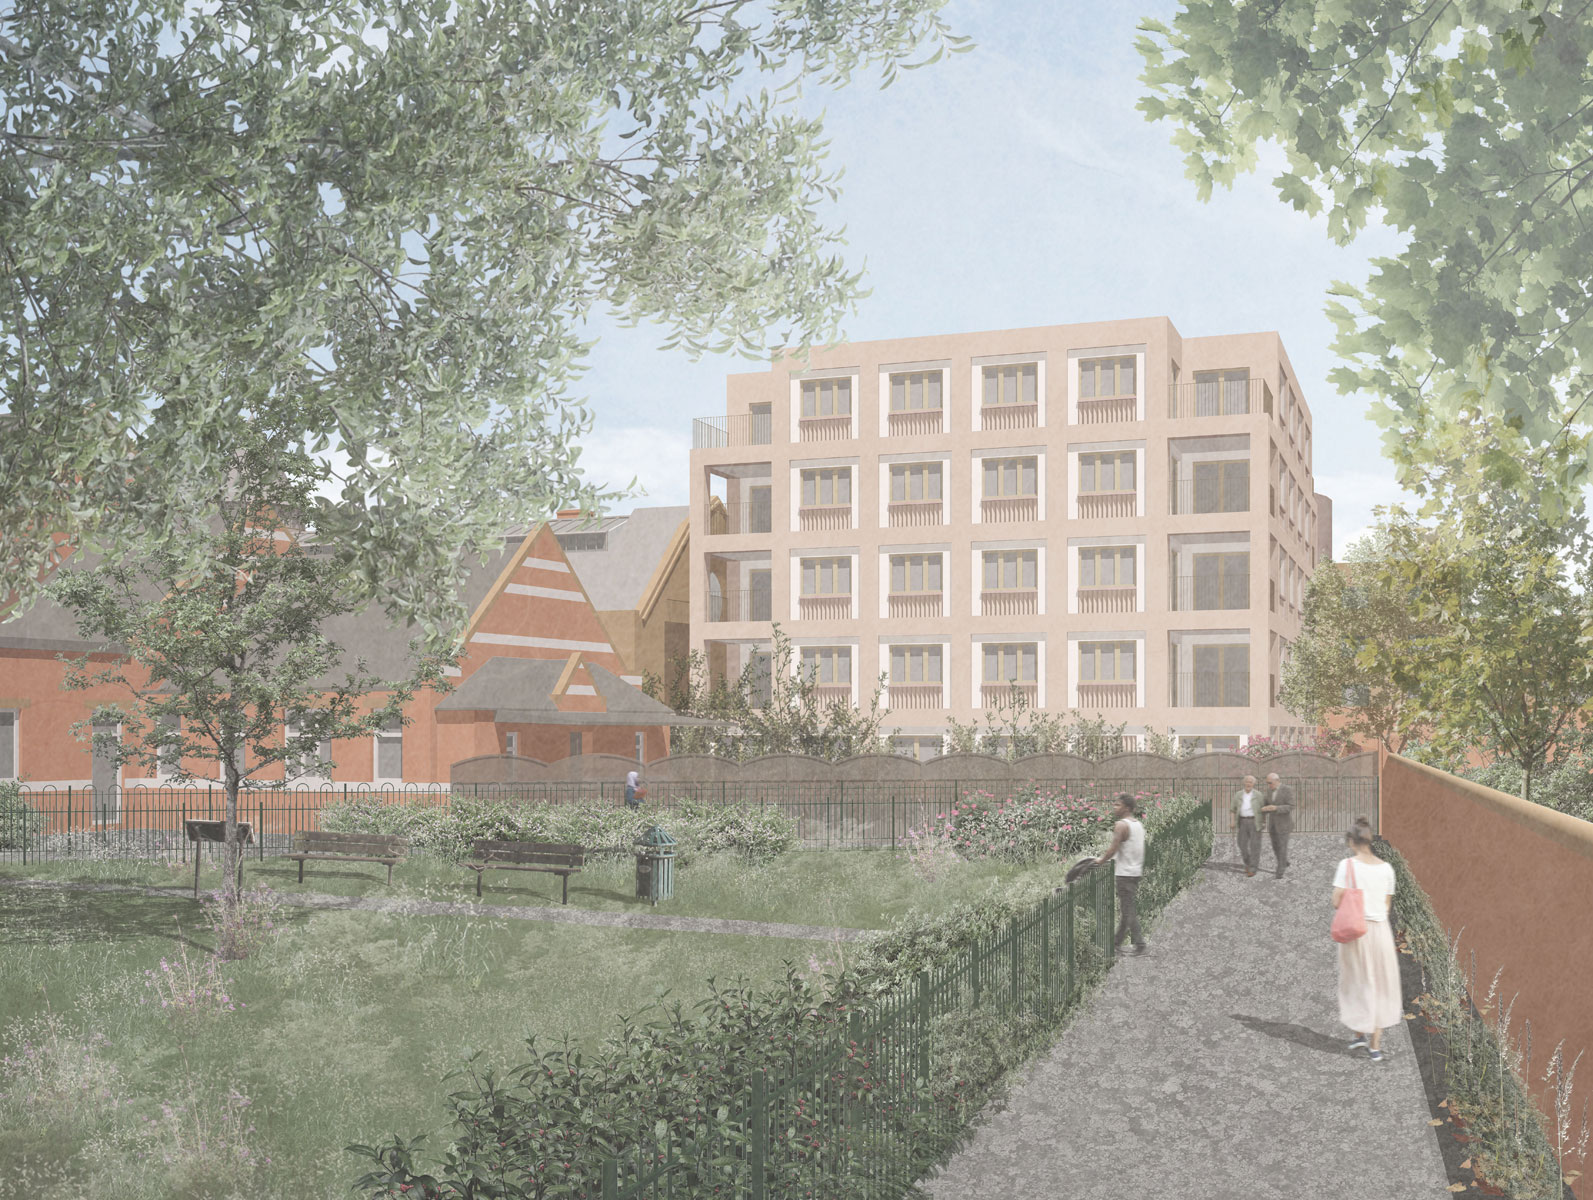 Ladywell Playtower Residential, Lewisham London, Proposed view of block option from Ladywell Fields, Pringle Richards Sharratt